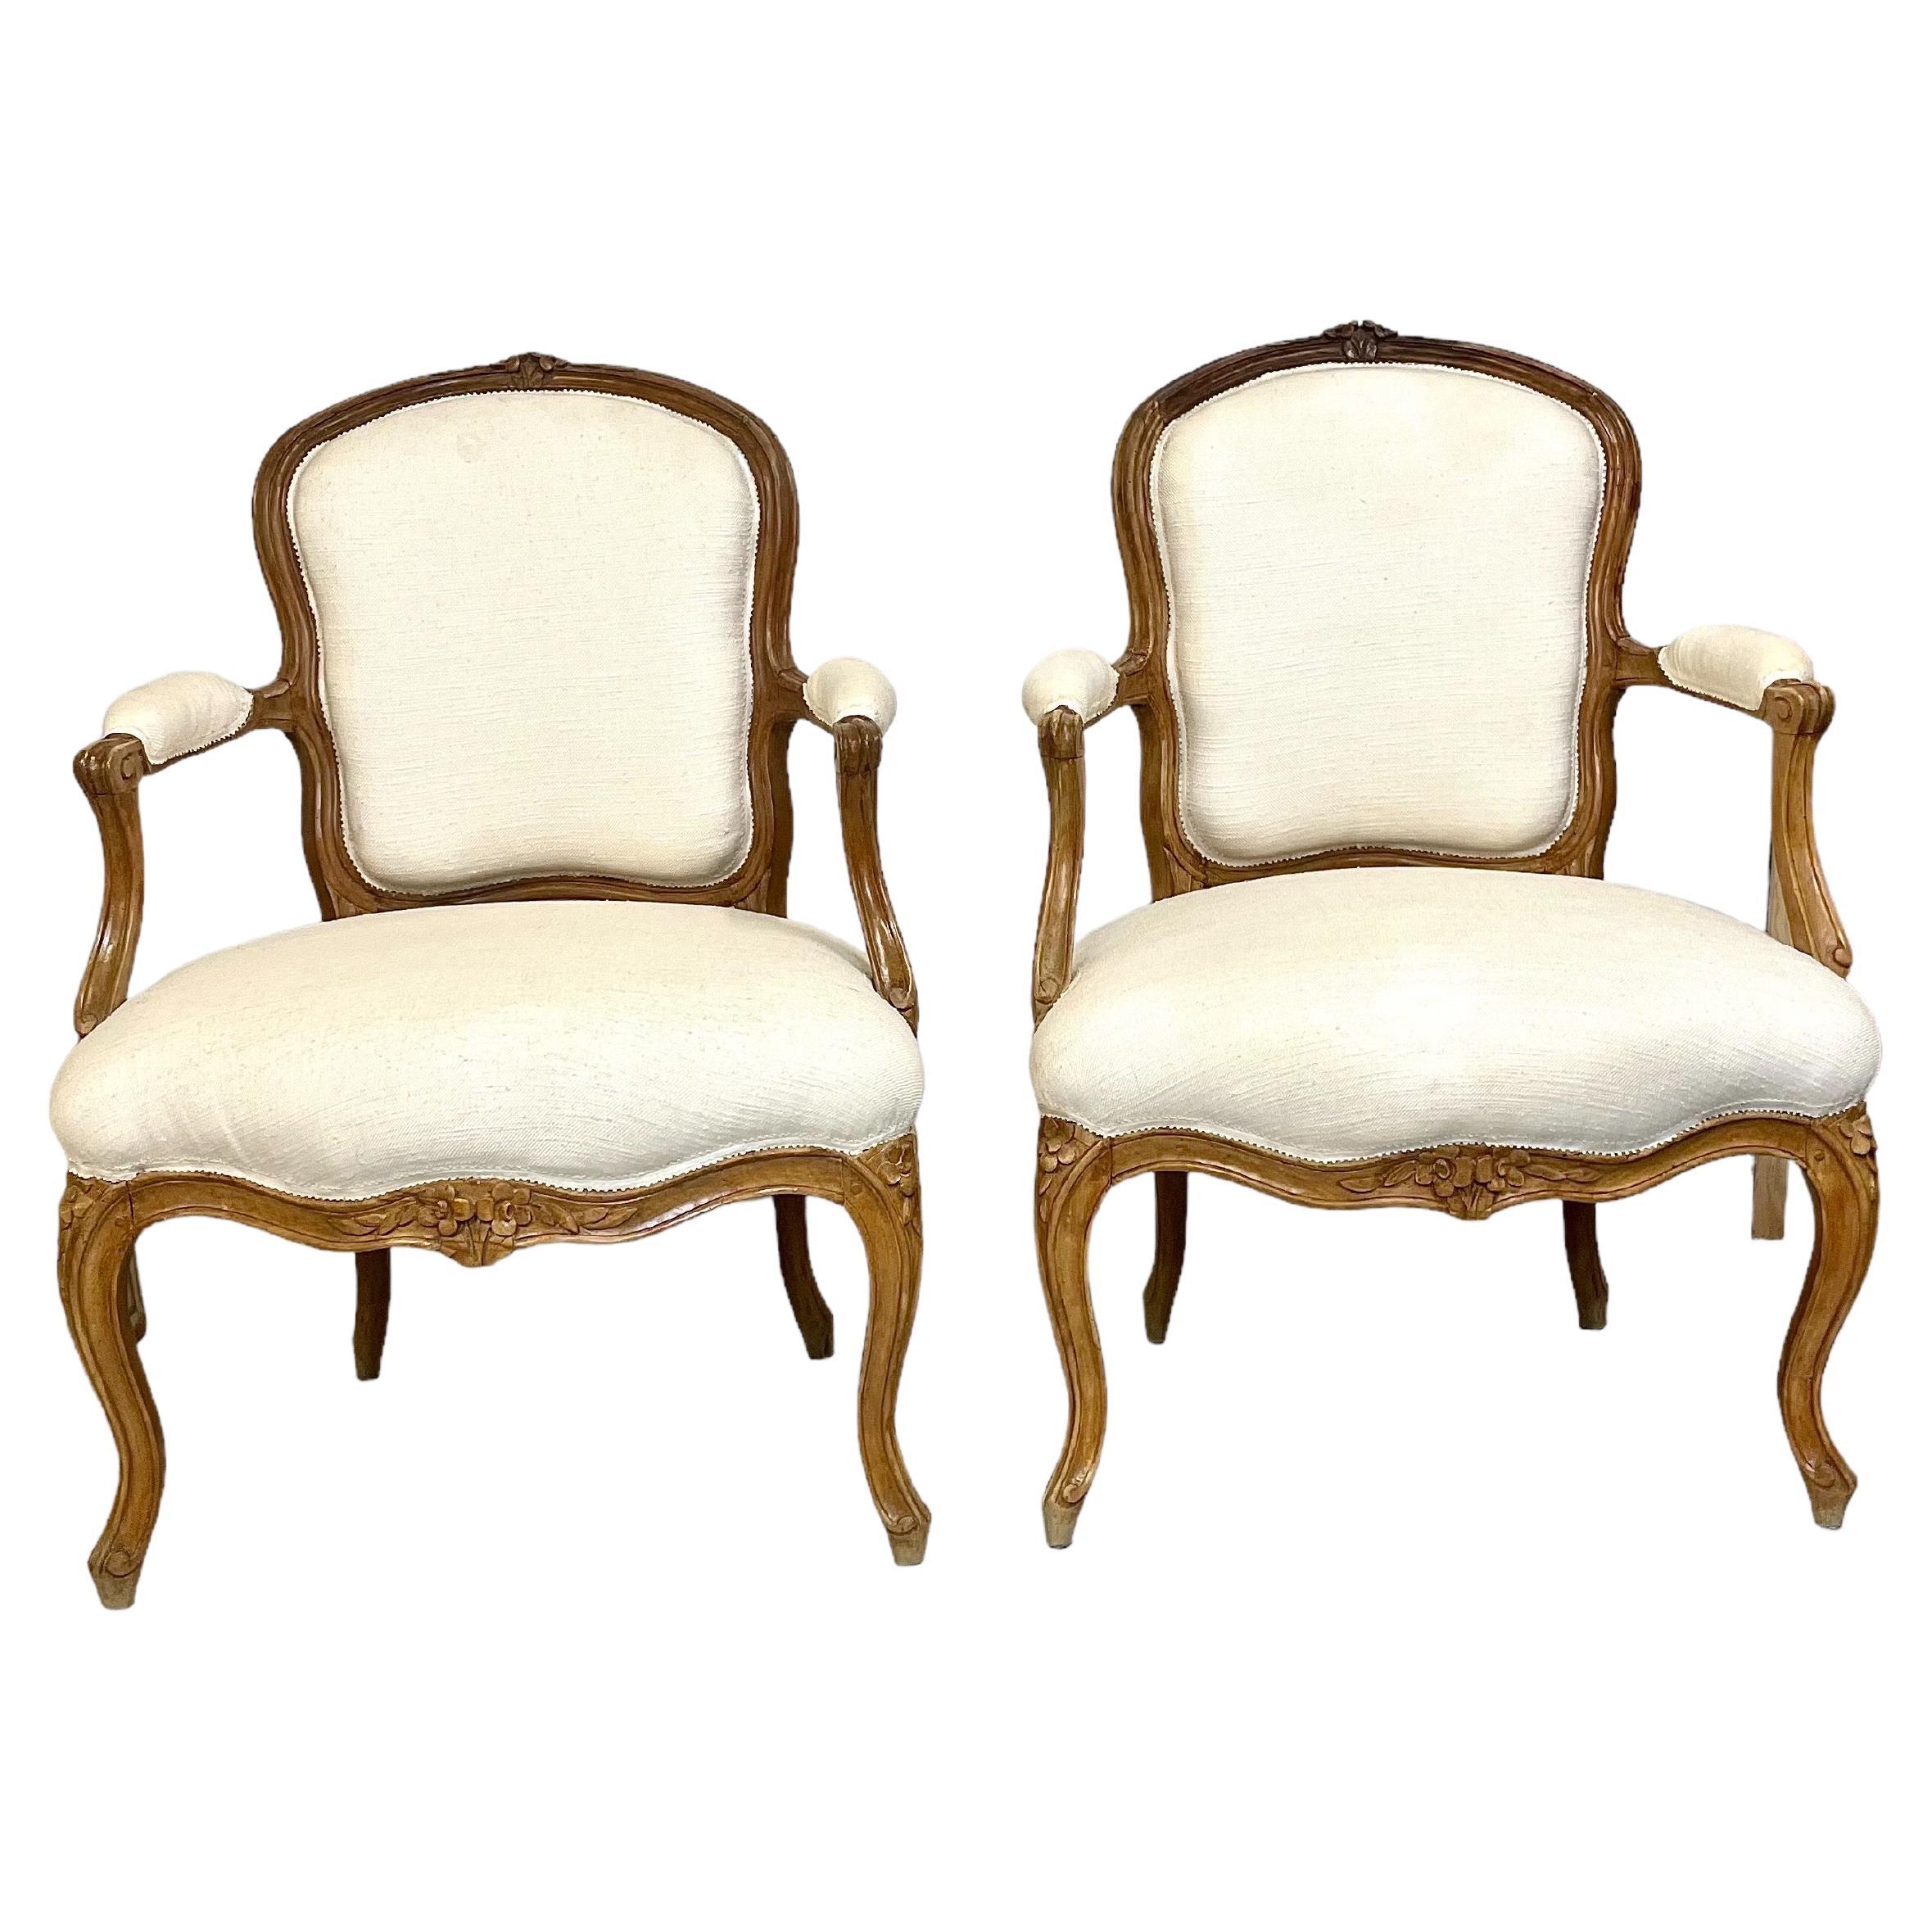 Louis XV Period Pair of Walnut Cabriolets Armchairs, 18th Century